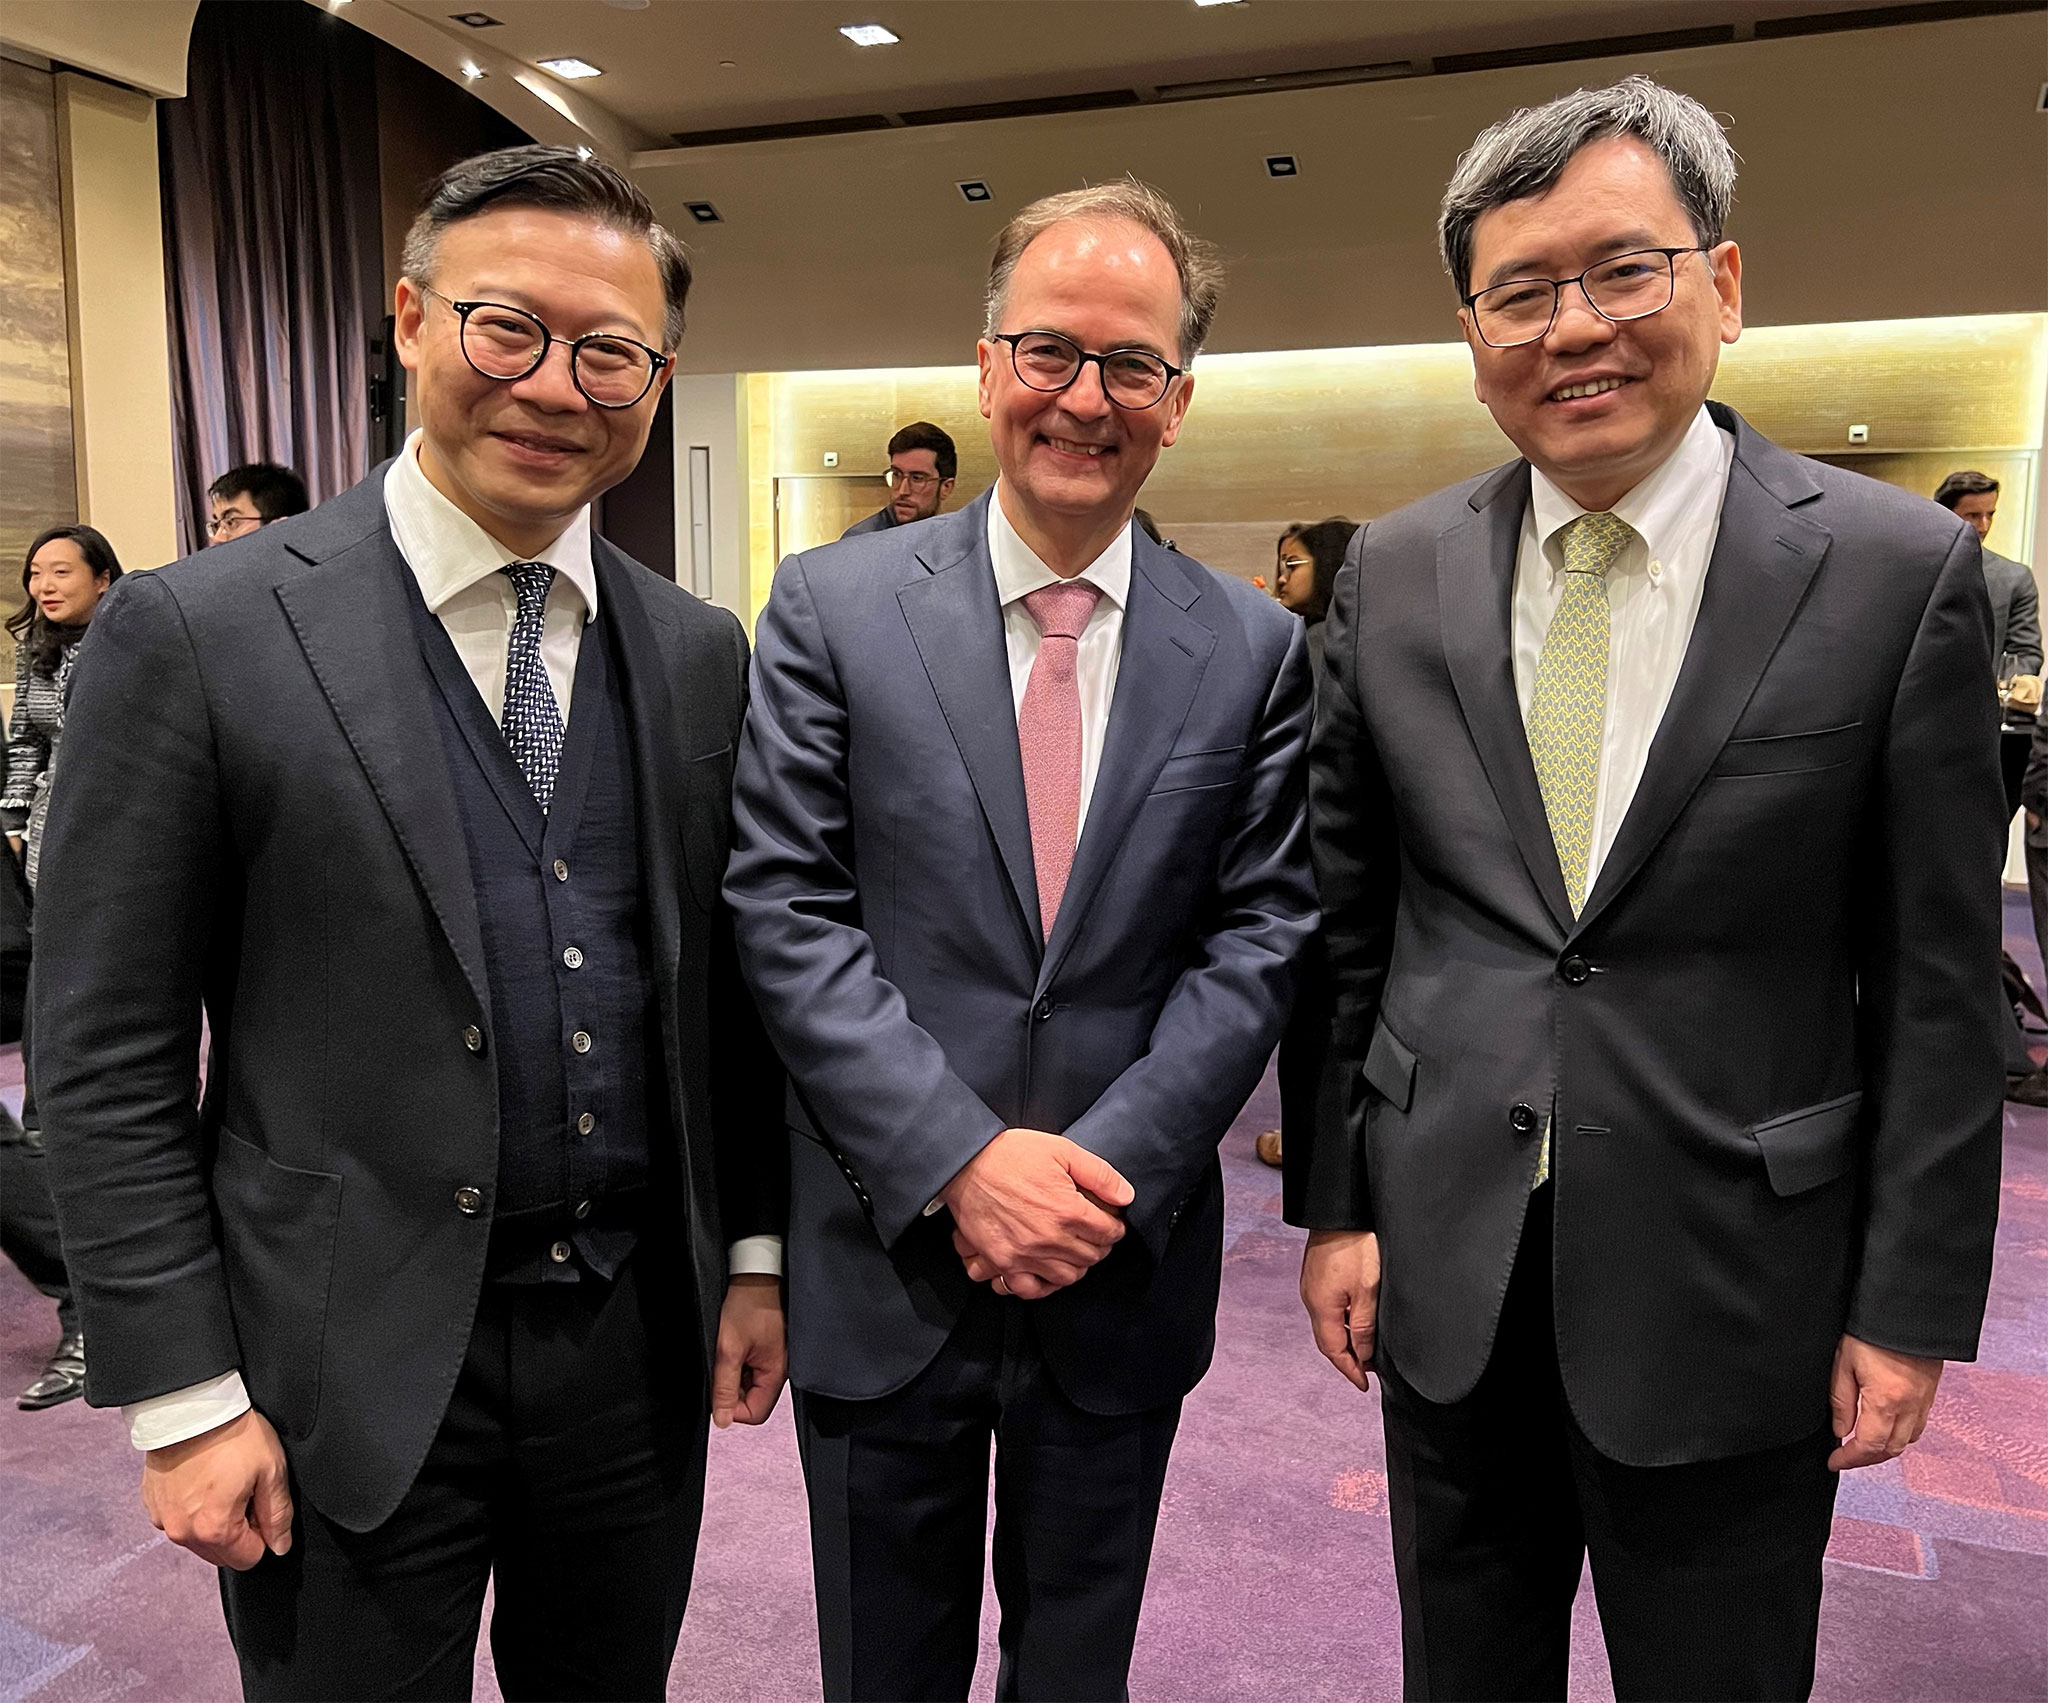 The Deputy Secretary for Justice, Mr Cheung Kwok-kwan, on March 9 (The Hague time) attended a reception hosted by the People's Republic of China for the delegates attending the meeting of the Hague Conference on Private International Law (HCCH)'s Council on General Affairs and Policy in The Hague, the Netherlands. Photo shows (from left) Mr Cheung; the Secretary General of the HCCH, Dr Christophe Bernasconi; and the Ambassador Extraordinary and Plenipotentiary of the People's Republic of China to the Kingdom of the Netherlands, Mr Tan Jian, at the reception.